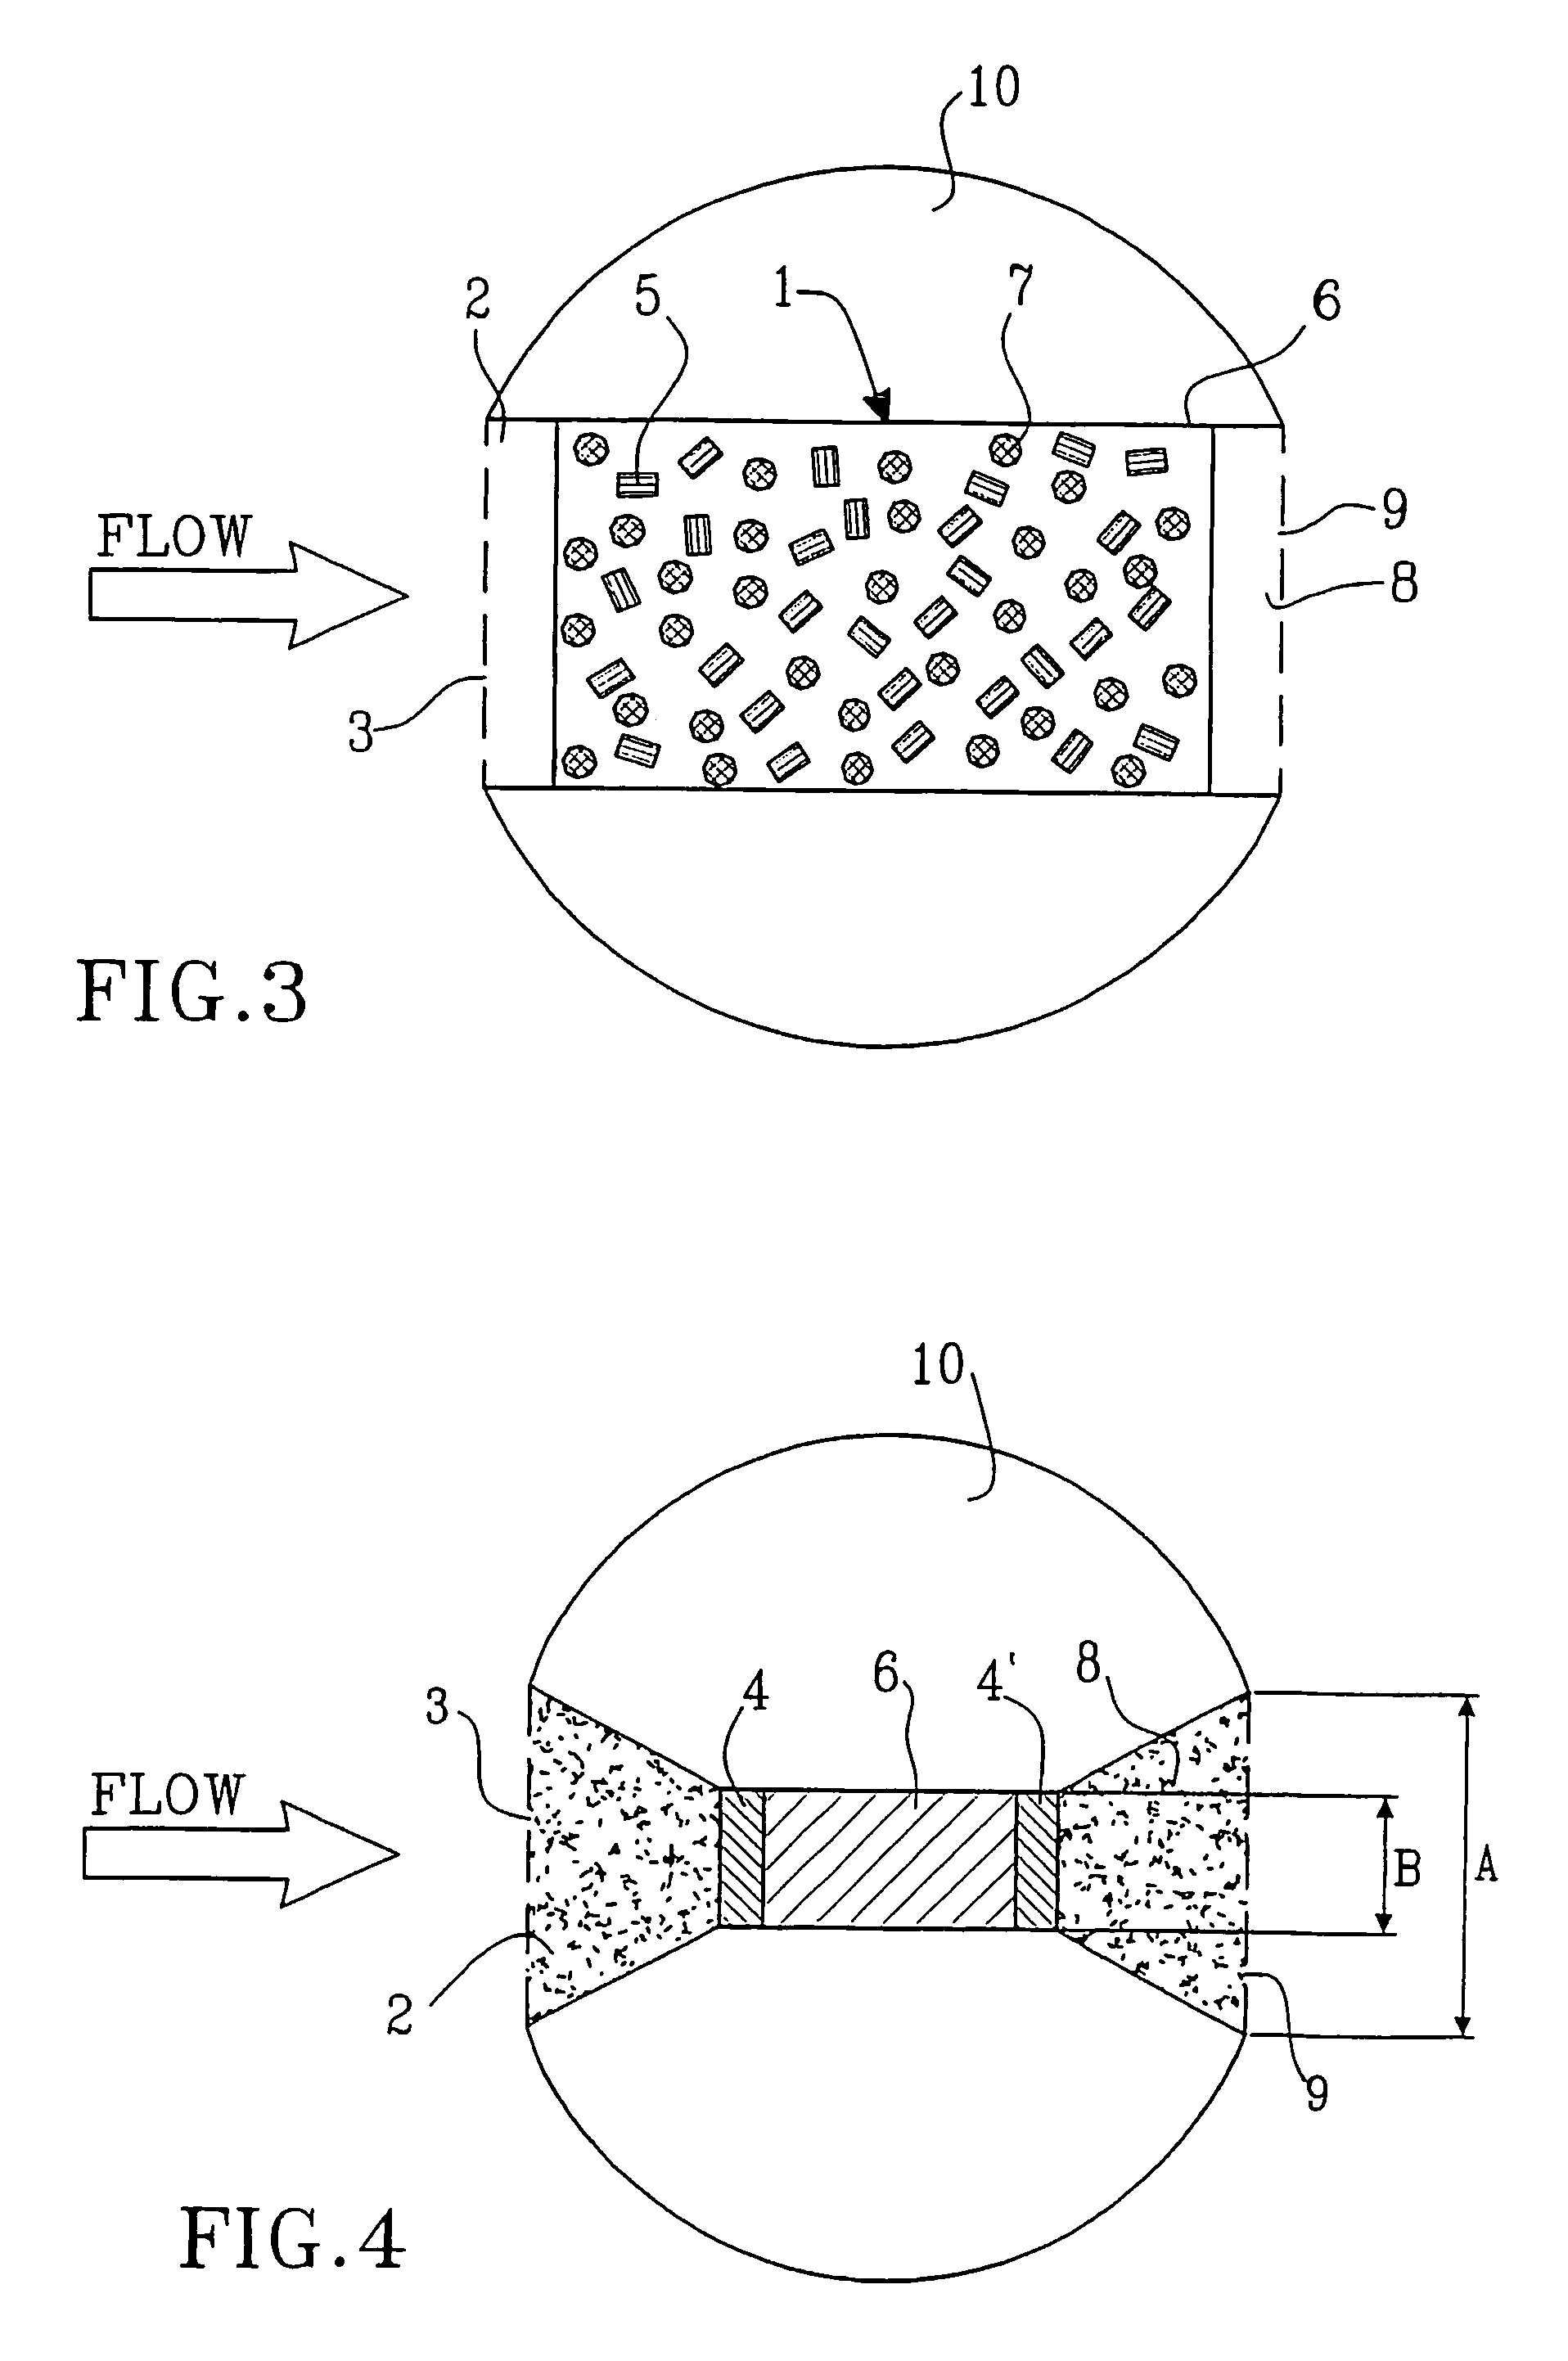 Sampling device and method for measuring fluid flow and solute mass transport